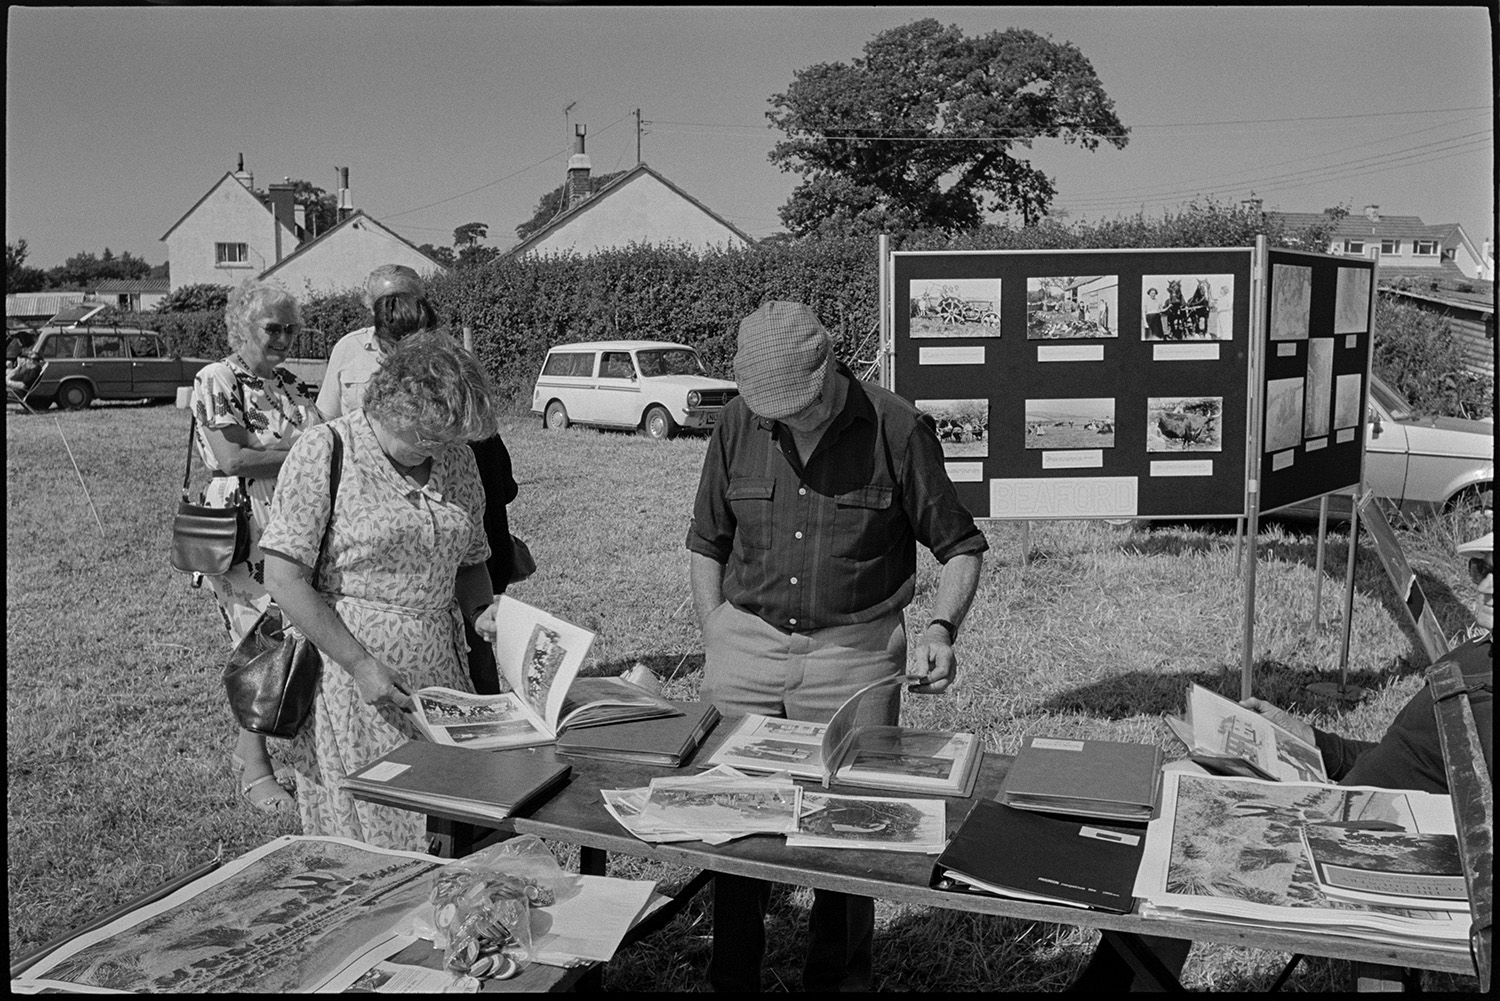 Country fair, majorettes, cups on display, stalls.
[Men and women looking through photographs from the Beaford Archive displayed on an outside table at Ashreigney Country Fair. There are display boards with more photographs, parked cars, and some village houses in the background.]